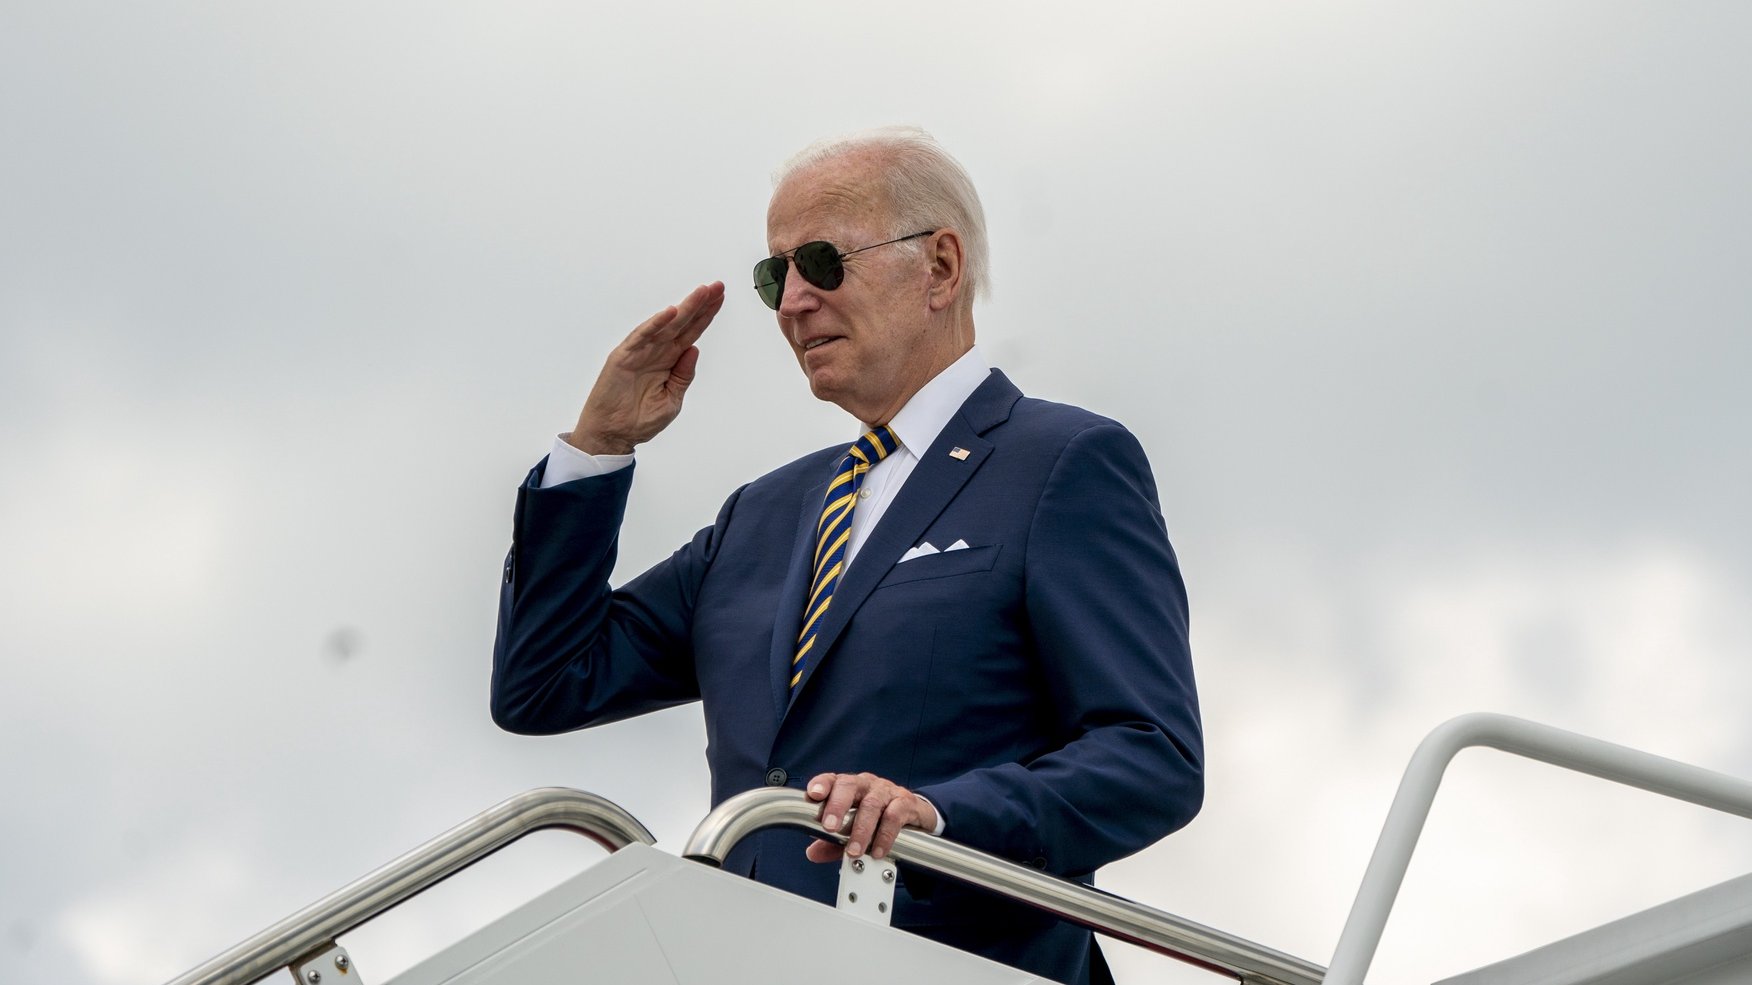 epa10114524 US President Joe Biden salutes as he boards Air Force One at Joint Base Andrews, Maryland, USA, 10 August 2022. Biden will be travelling to South Carolina on vacation.  EPA/SHAWN THEW